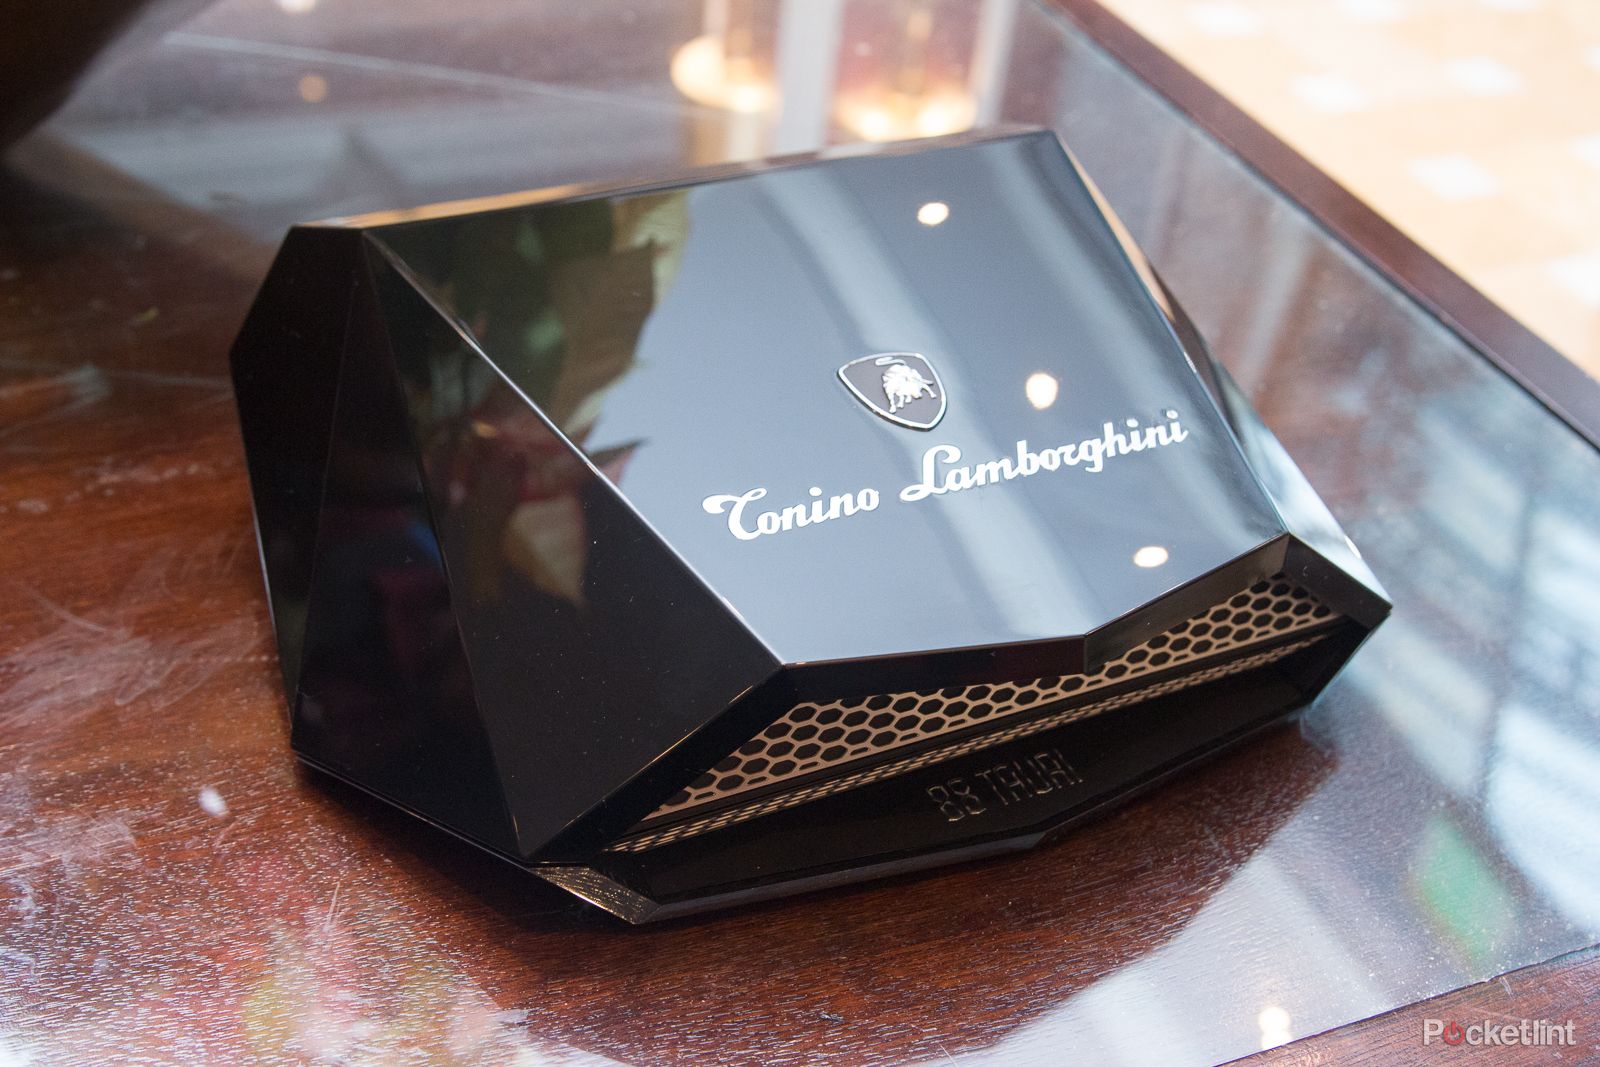 tonino lamborghini 88 tauri hands on with the 6 000 stainless steel and leather smartphone image 3